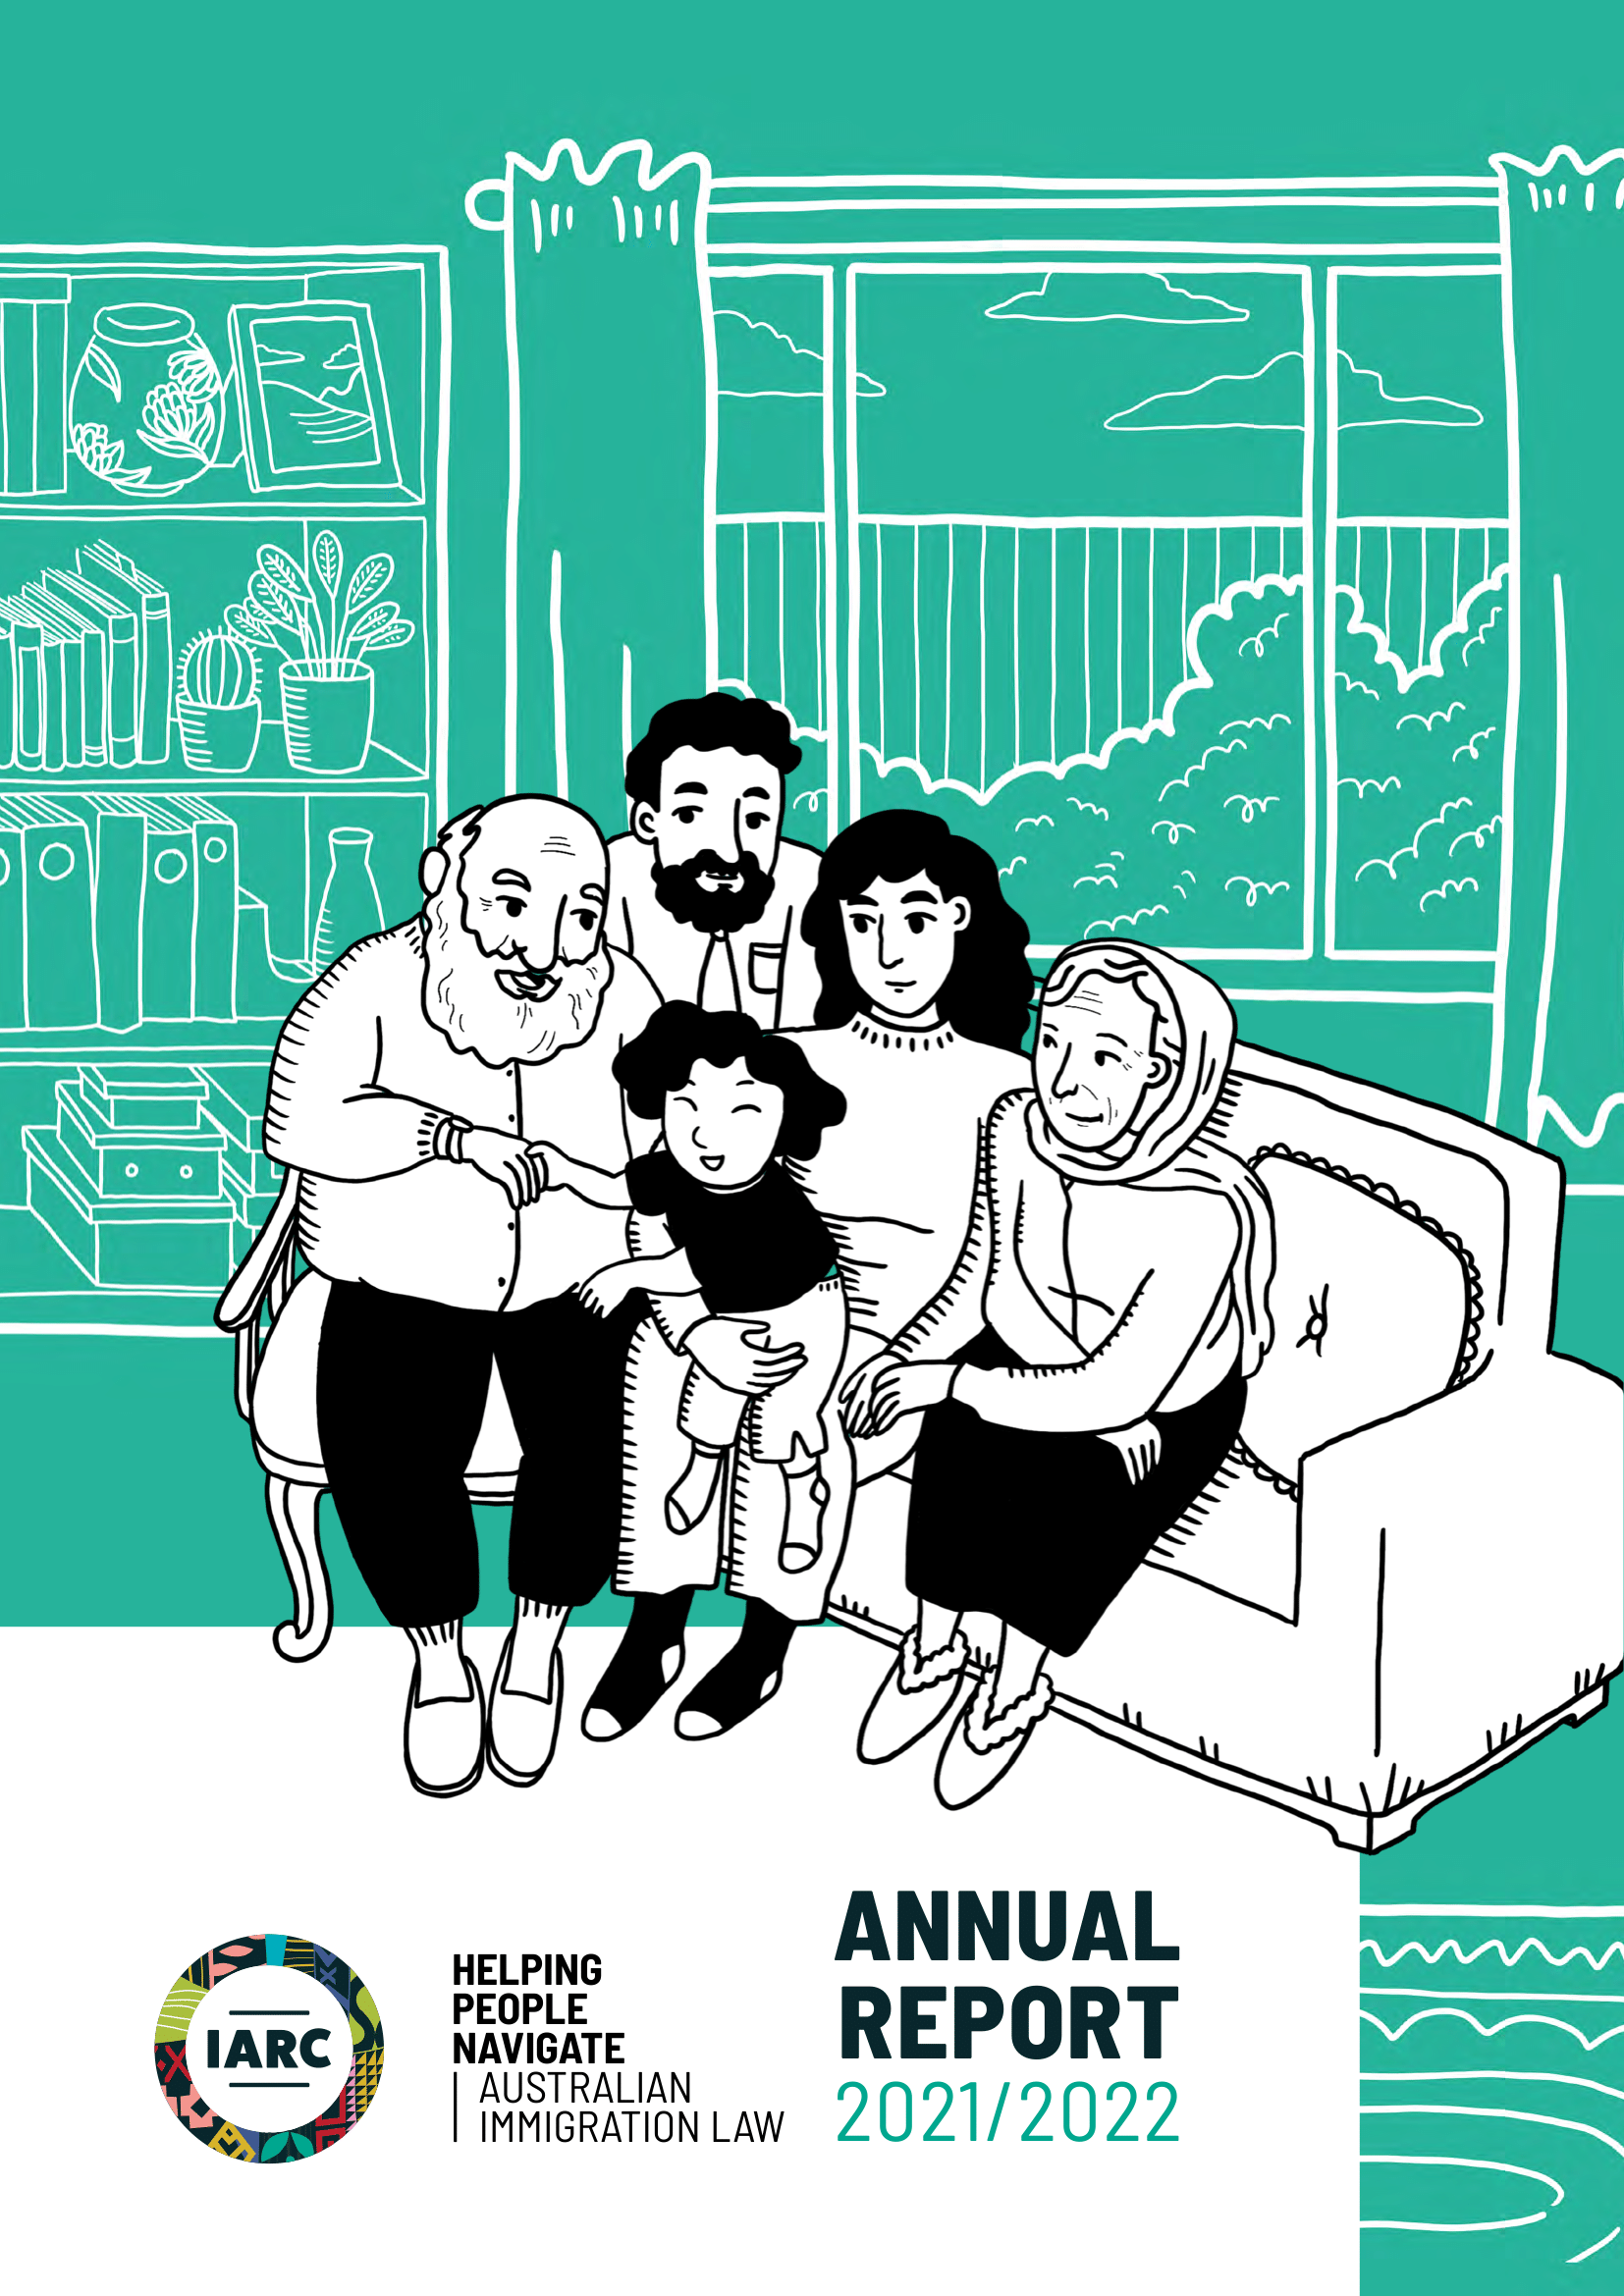 IARC Annual Report 2021-2022. Cover art by Judy Kuo.